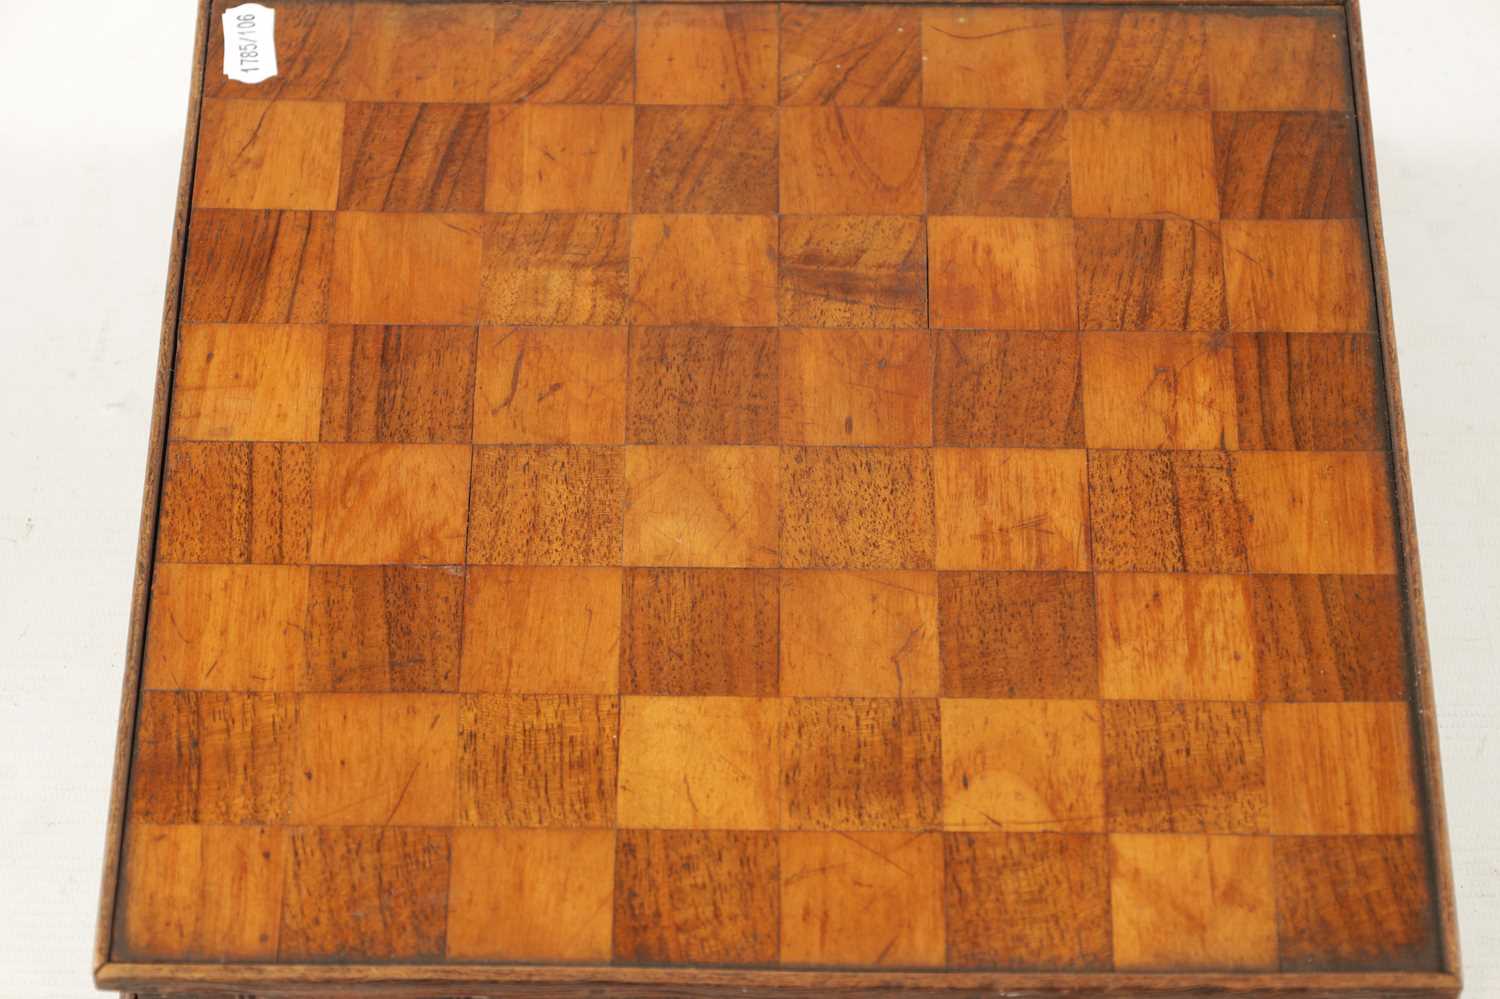 A 19TH CENTURY CARVED WOOD DOUBLE SIDED CHESS BOARD - Image 5 of 5